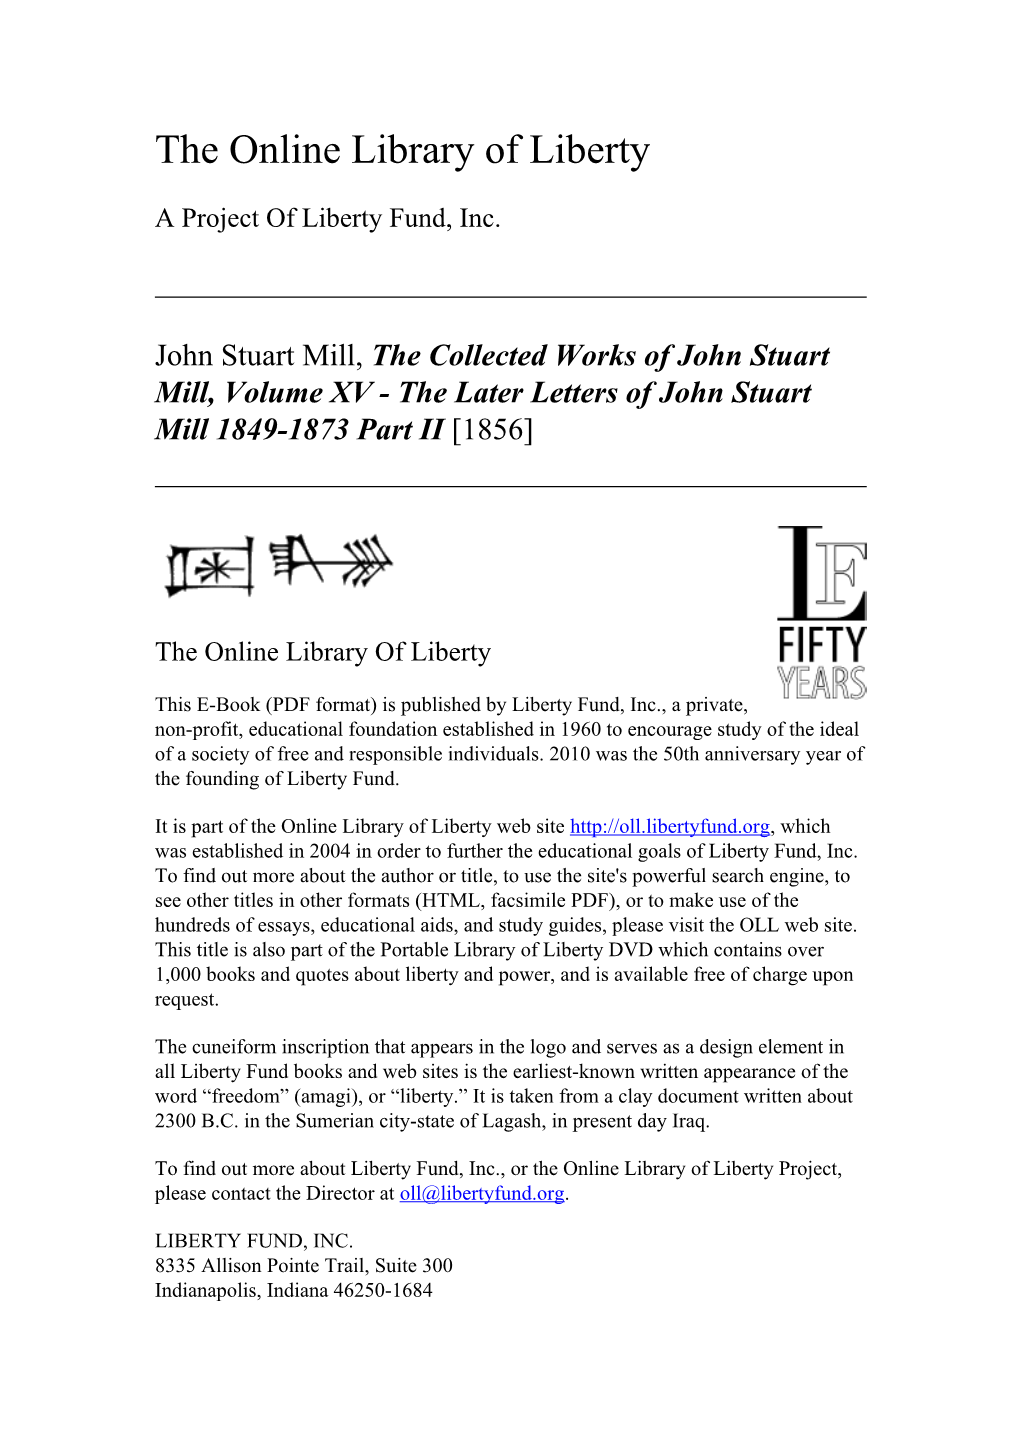 The Collected Works of John Stuart Mill, Volume XV - the Later Letters of John Stuart Mill 1849-1873 Part II [1856]